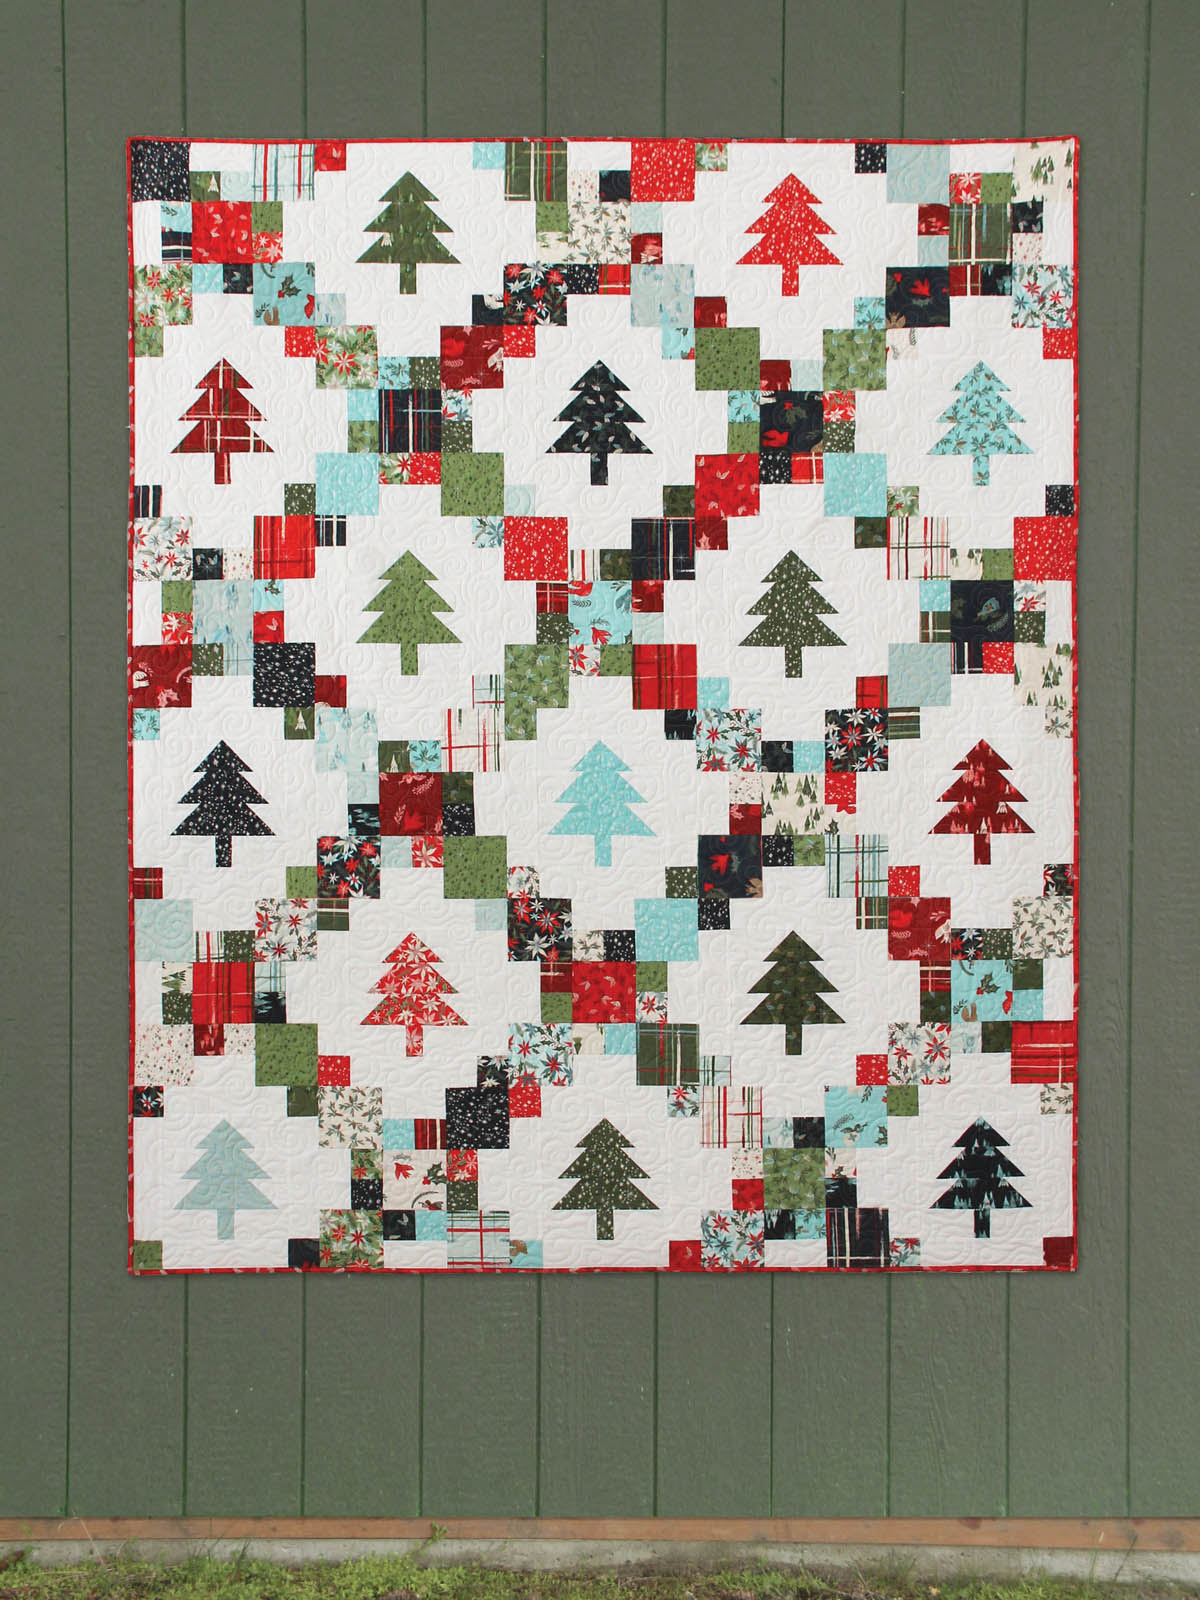  Christmas Fabric Squares Quilting Fabric Patchwork, 50